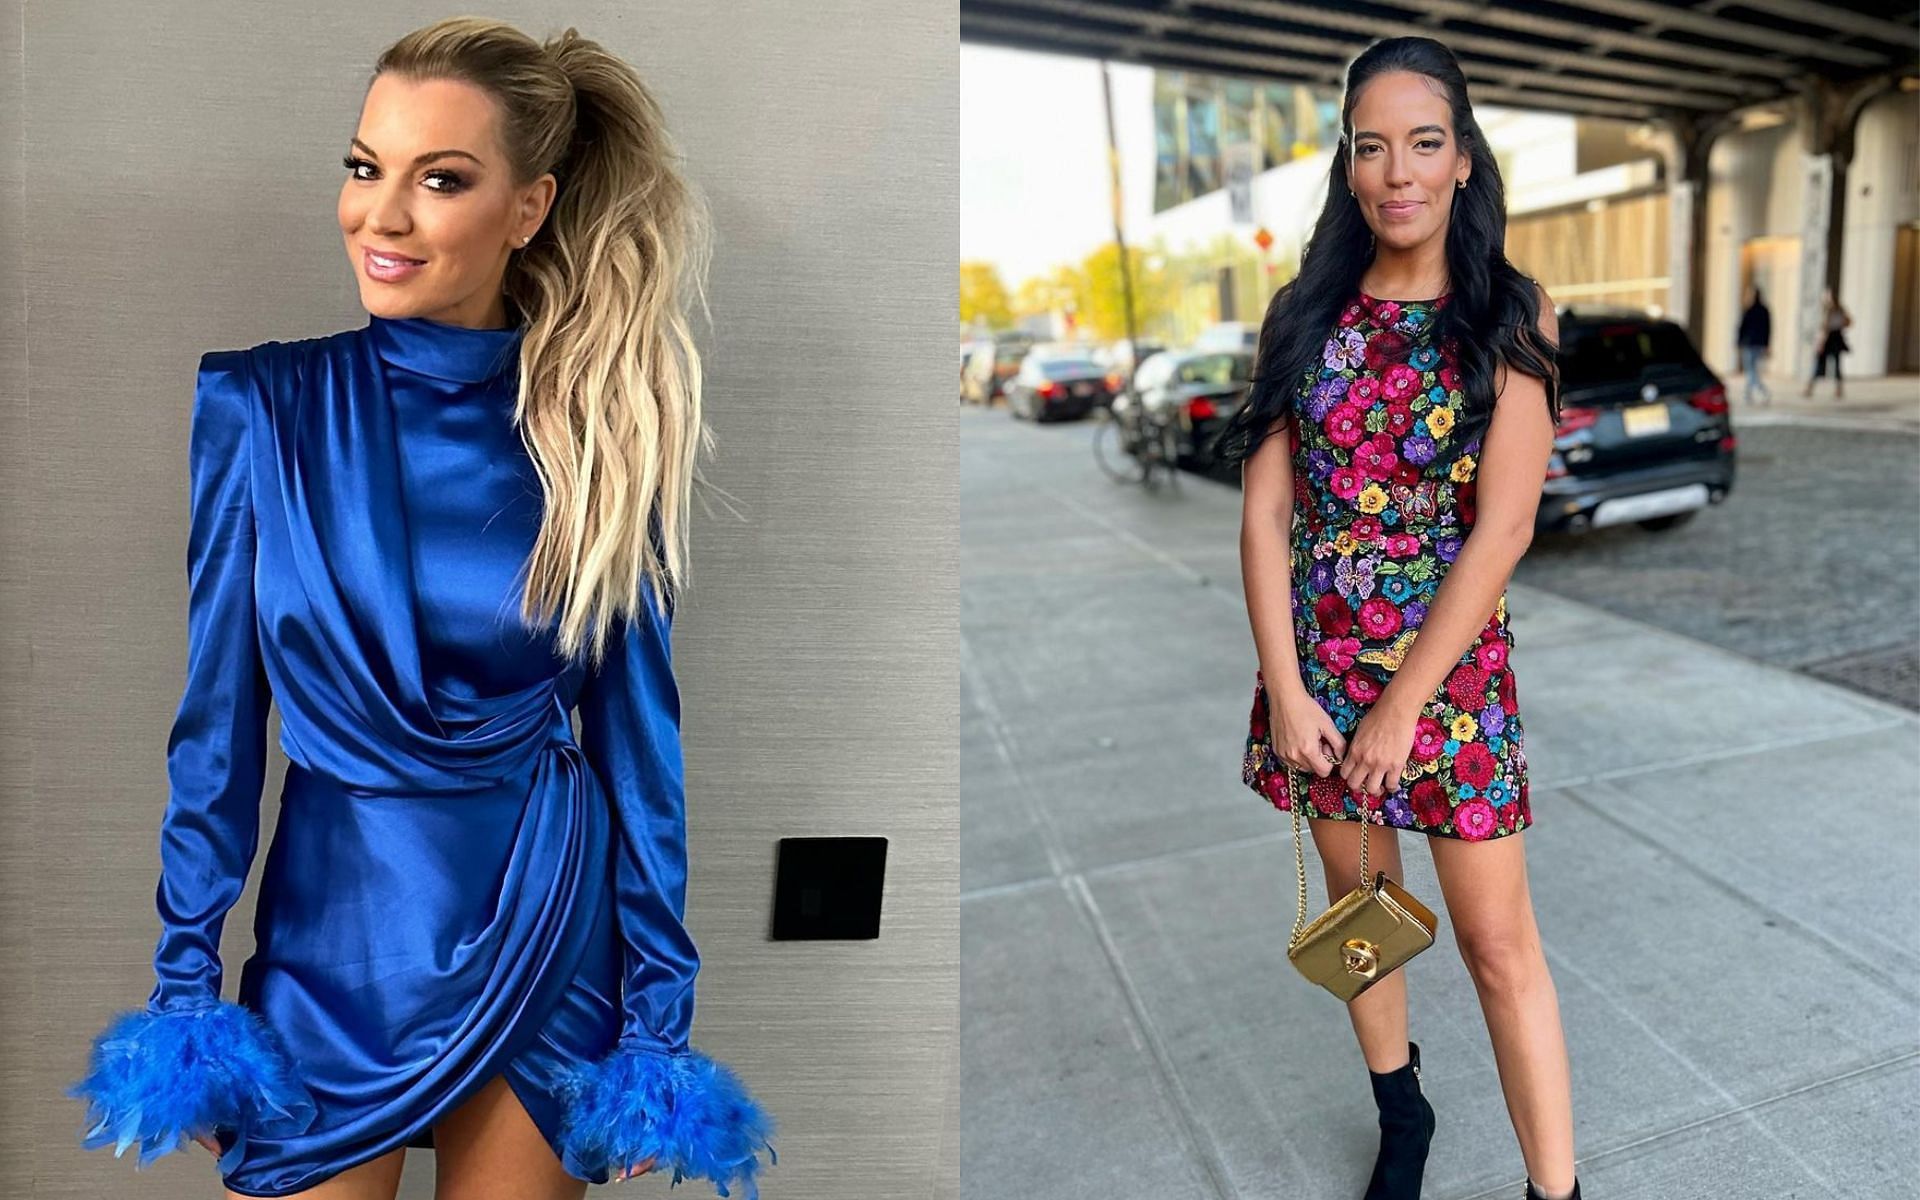 Lindsay Hubbard and Danielle Olivera allegedly had a big fight on Summer House Season 7 set (Images via lindshubbs and danielleolivera/ Instagram)